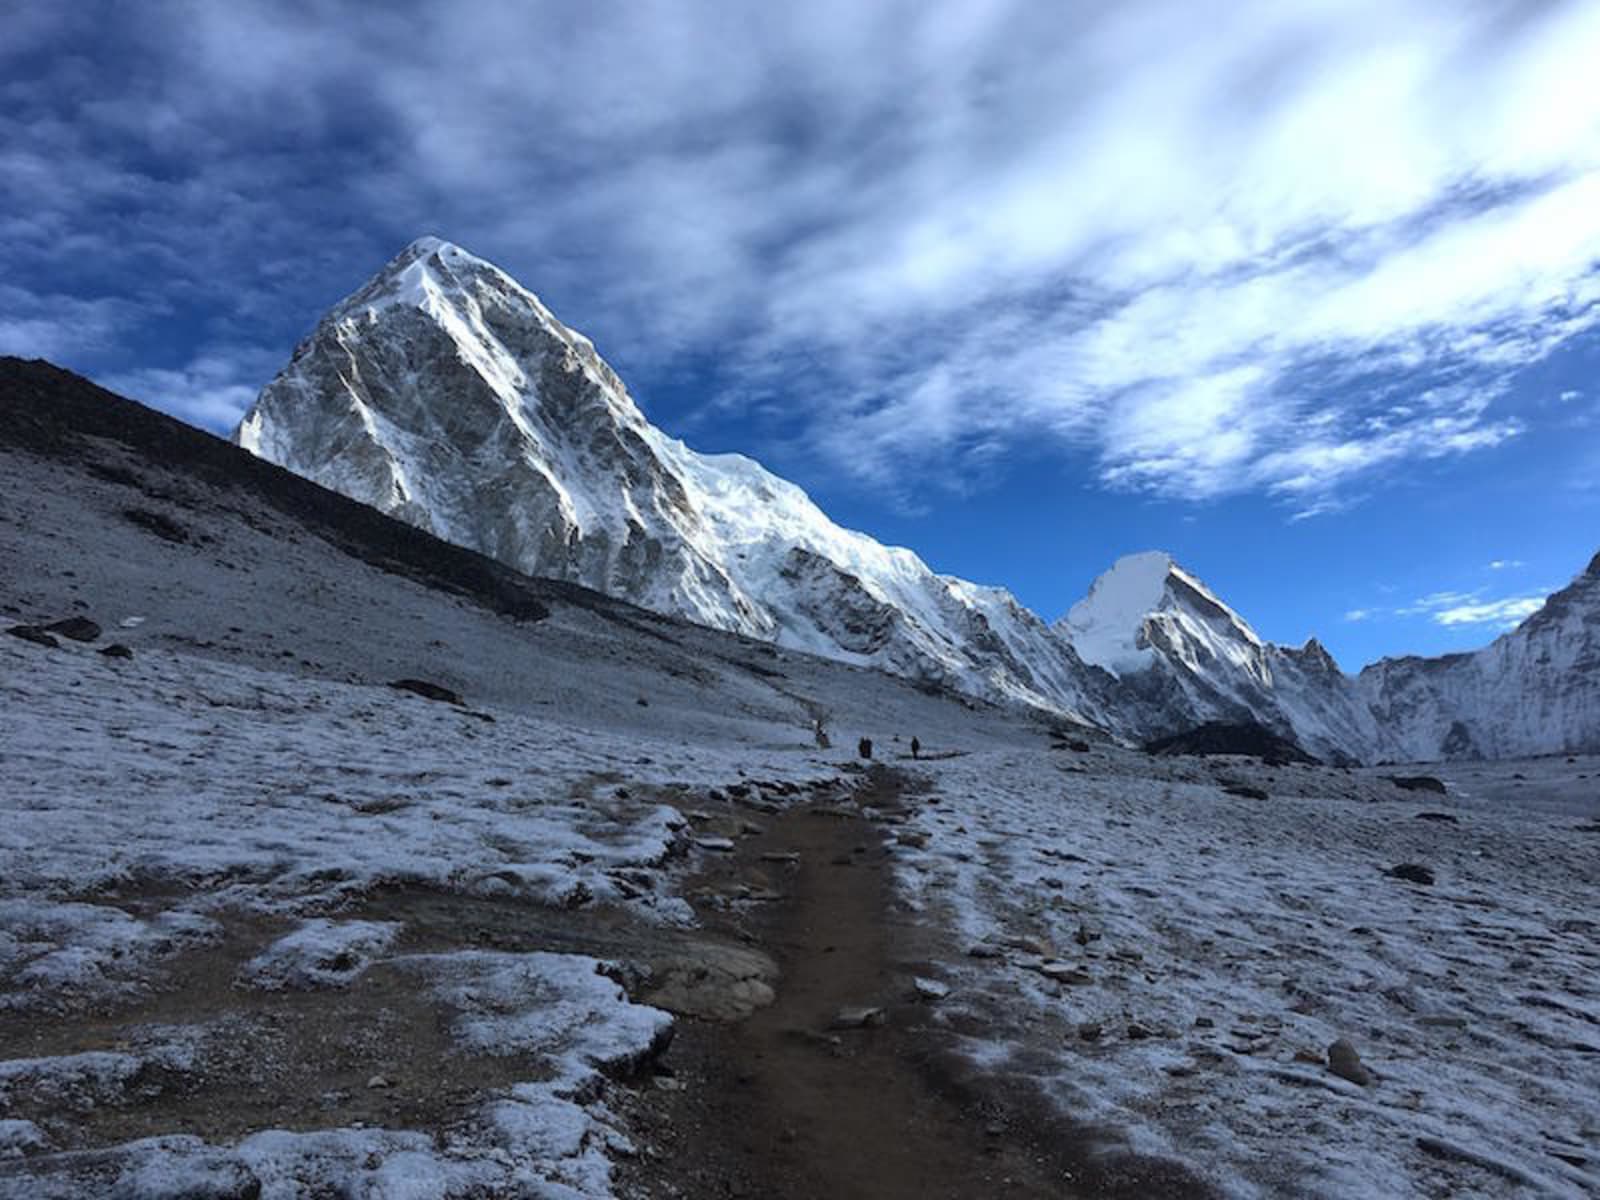 Snowy trail leading up to Mount Everest